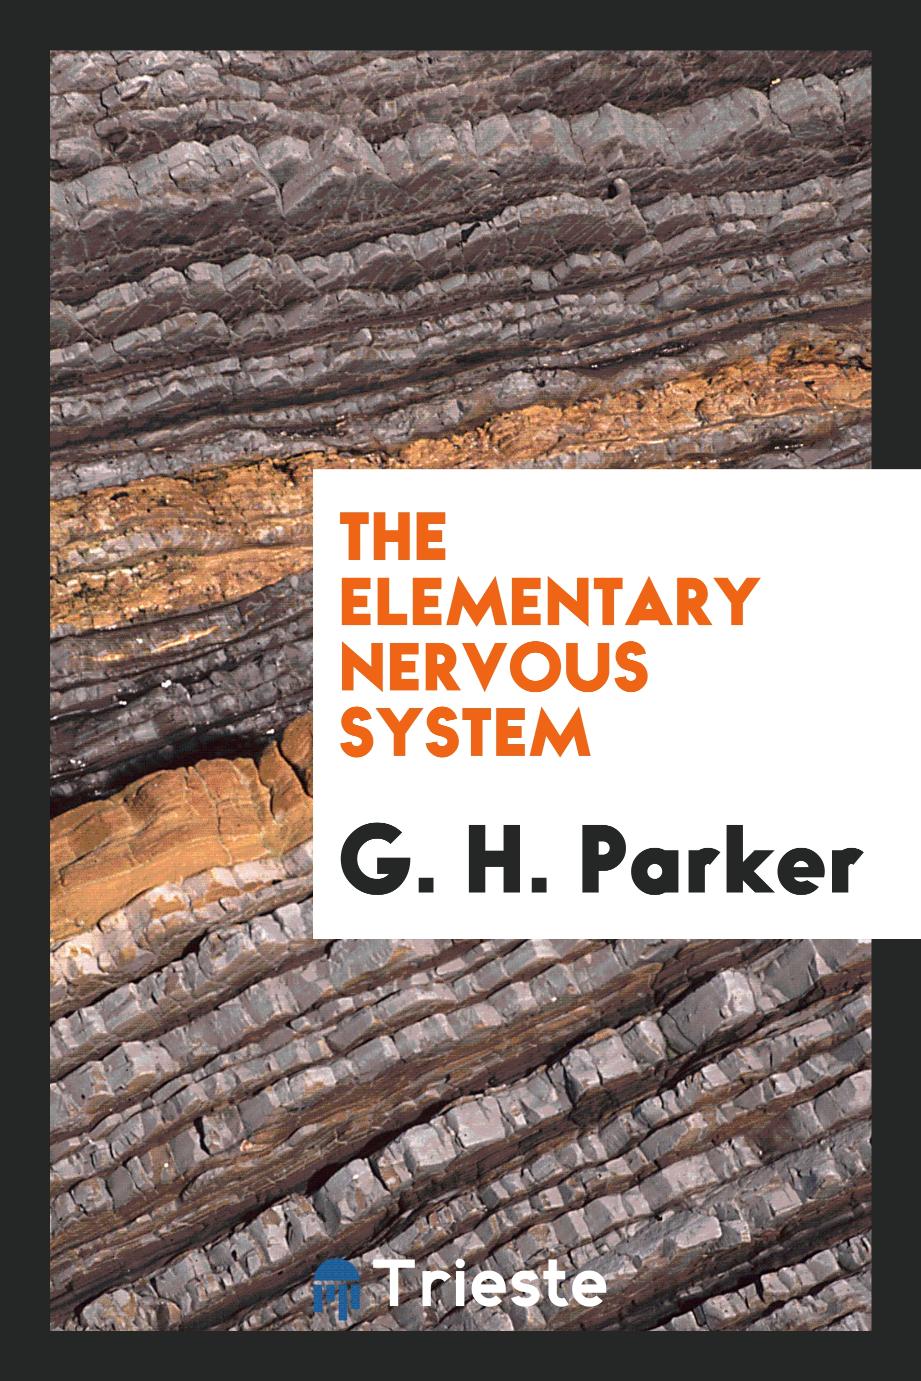 The elementary nervous system